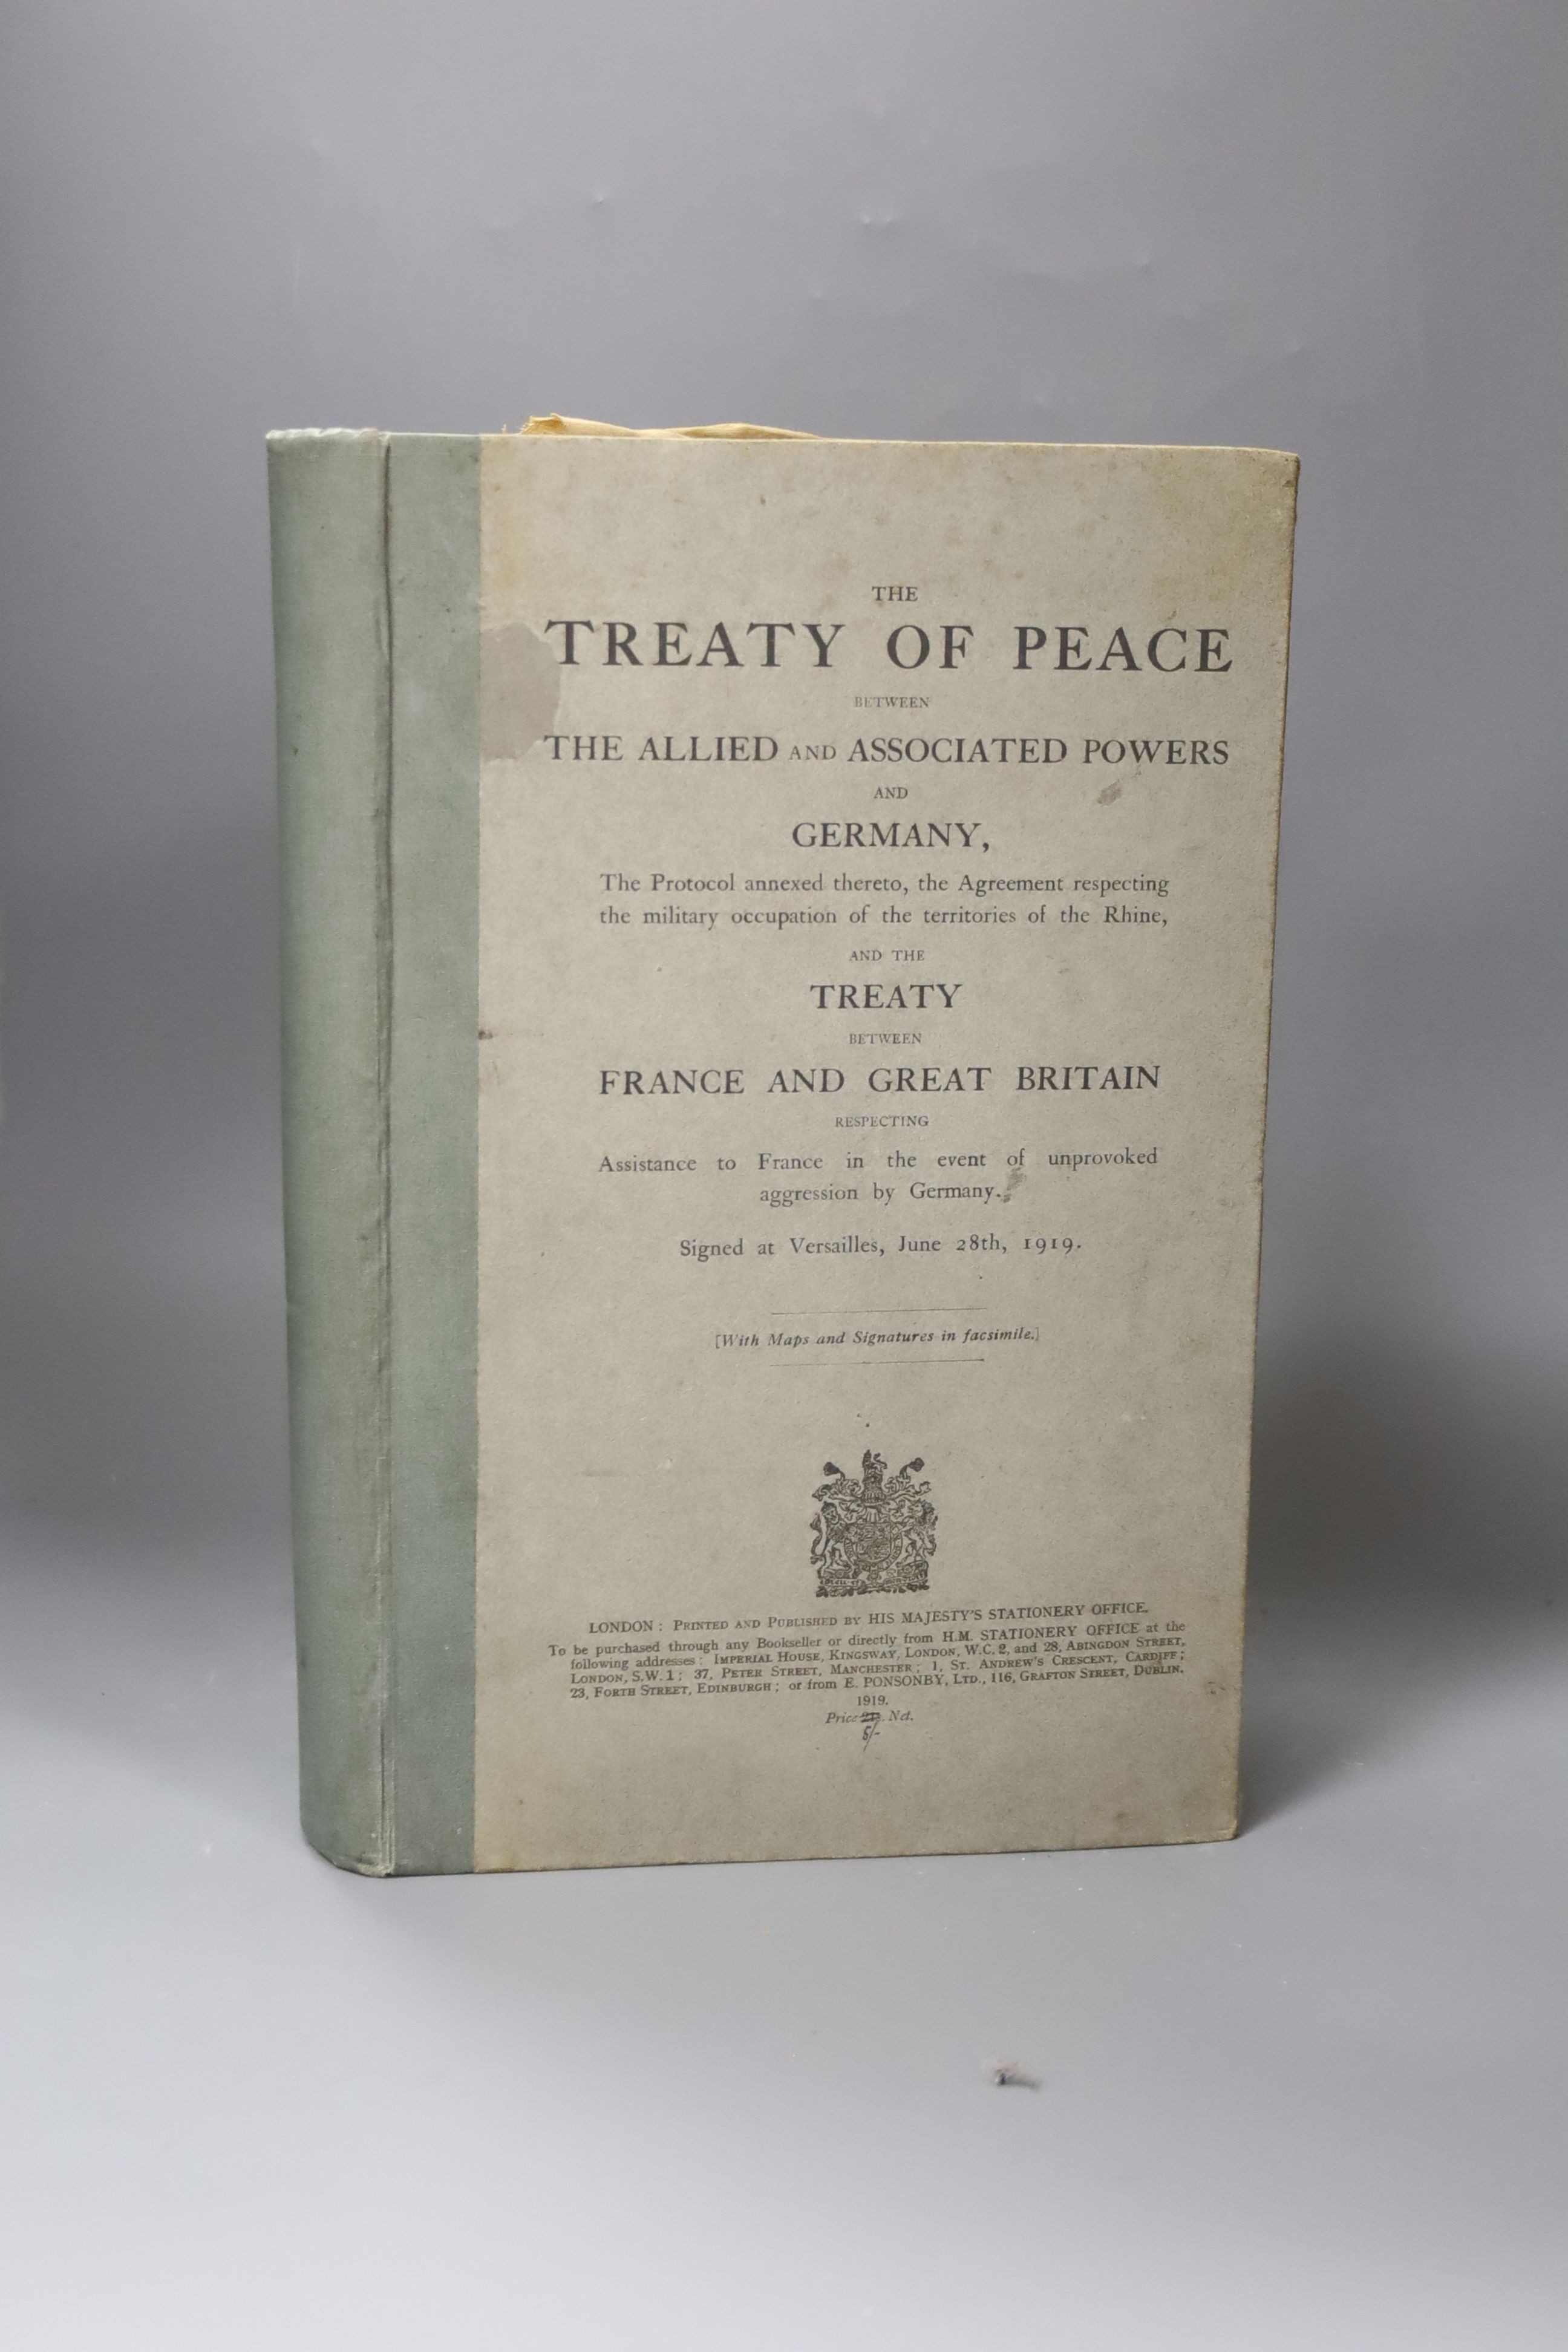 “Treaty of Peace between the Allied and Associated Powers and Germany” Versailles June 28th 1919 pub HMSO 1919 hard cover with maps.